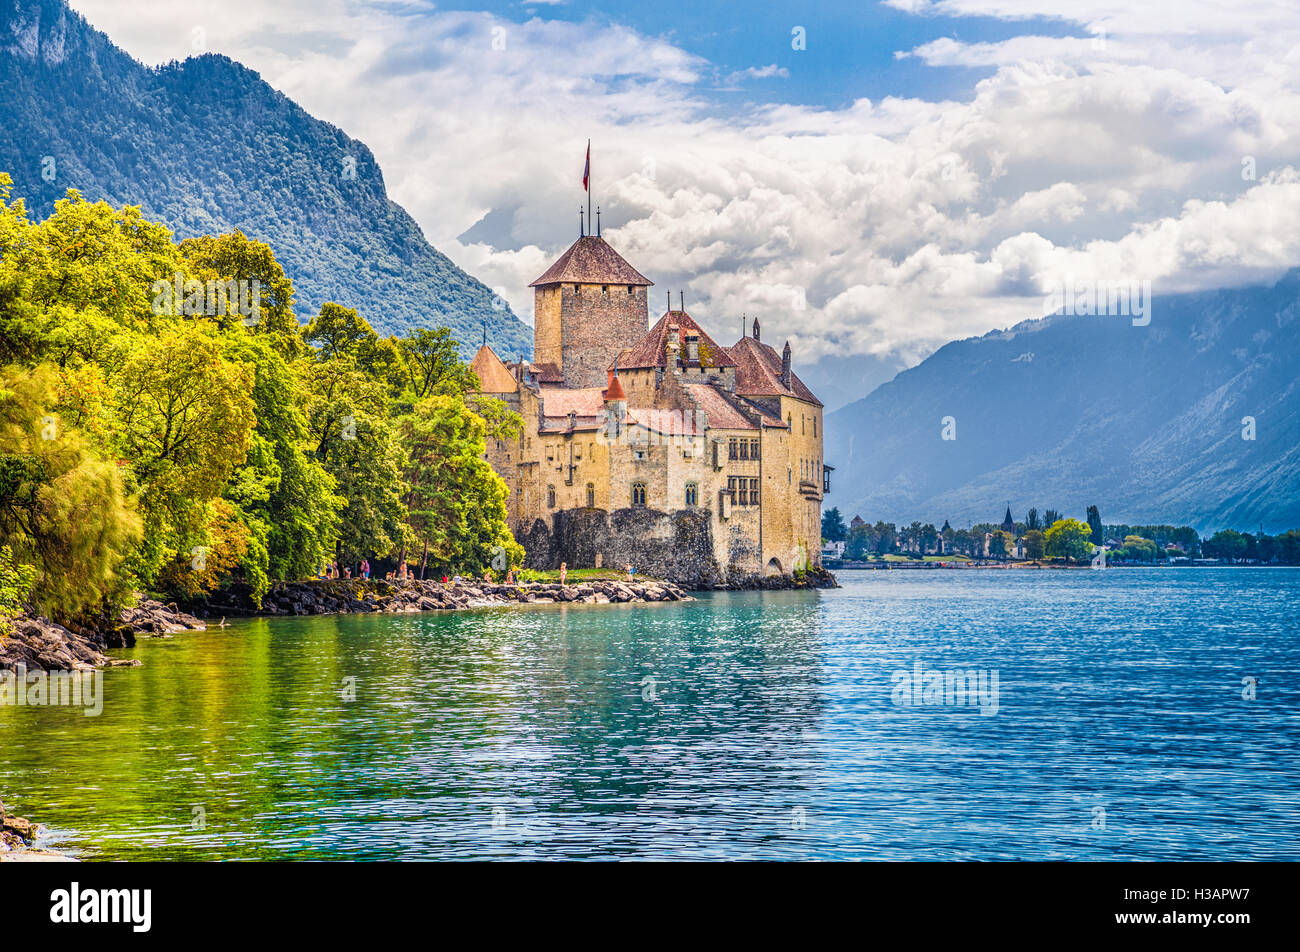 Classic view of famous Chateau de Chillon at Lake Geneva, one of Europe's most visited castles, in Veytaux, Switzerland Stock Photo